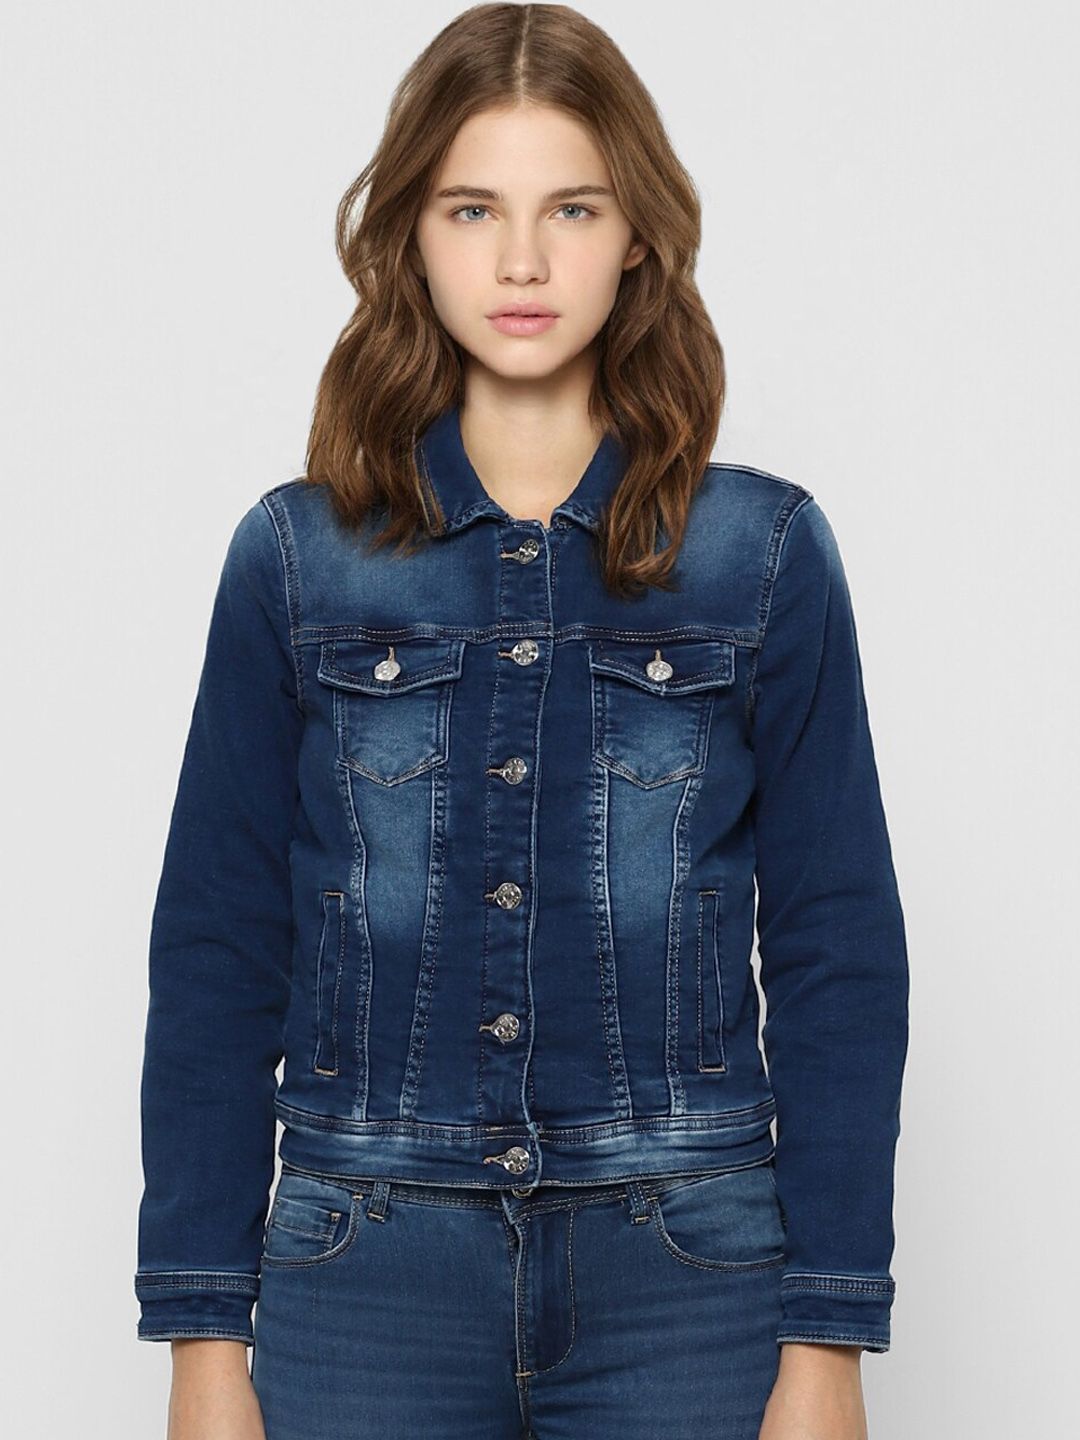 ONLY Women Navy Blue Washed Denim Jacket Price in India